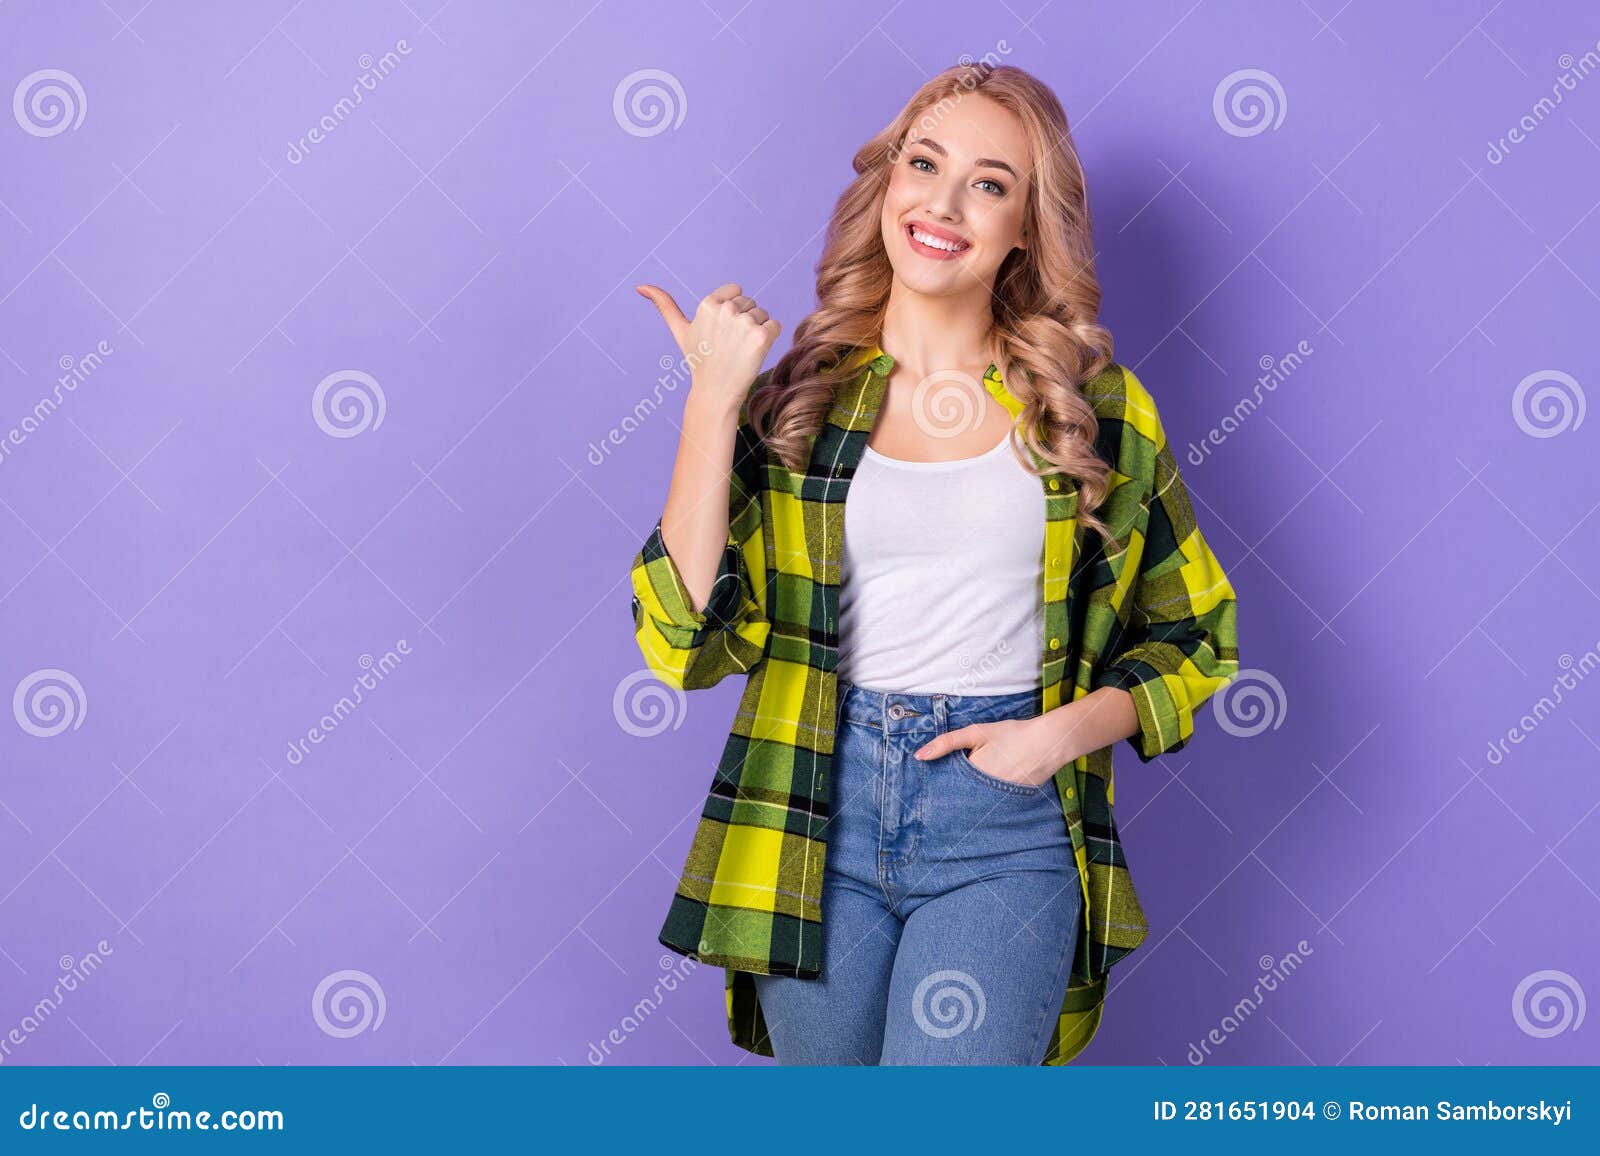 Photo Young Woman Selling Agent Advertising Clothes Wear Plaid Shirt ...